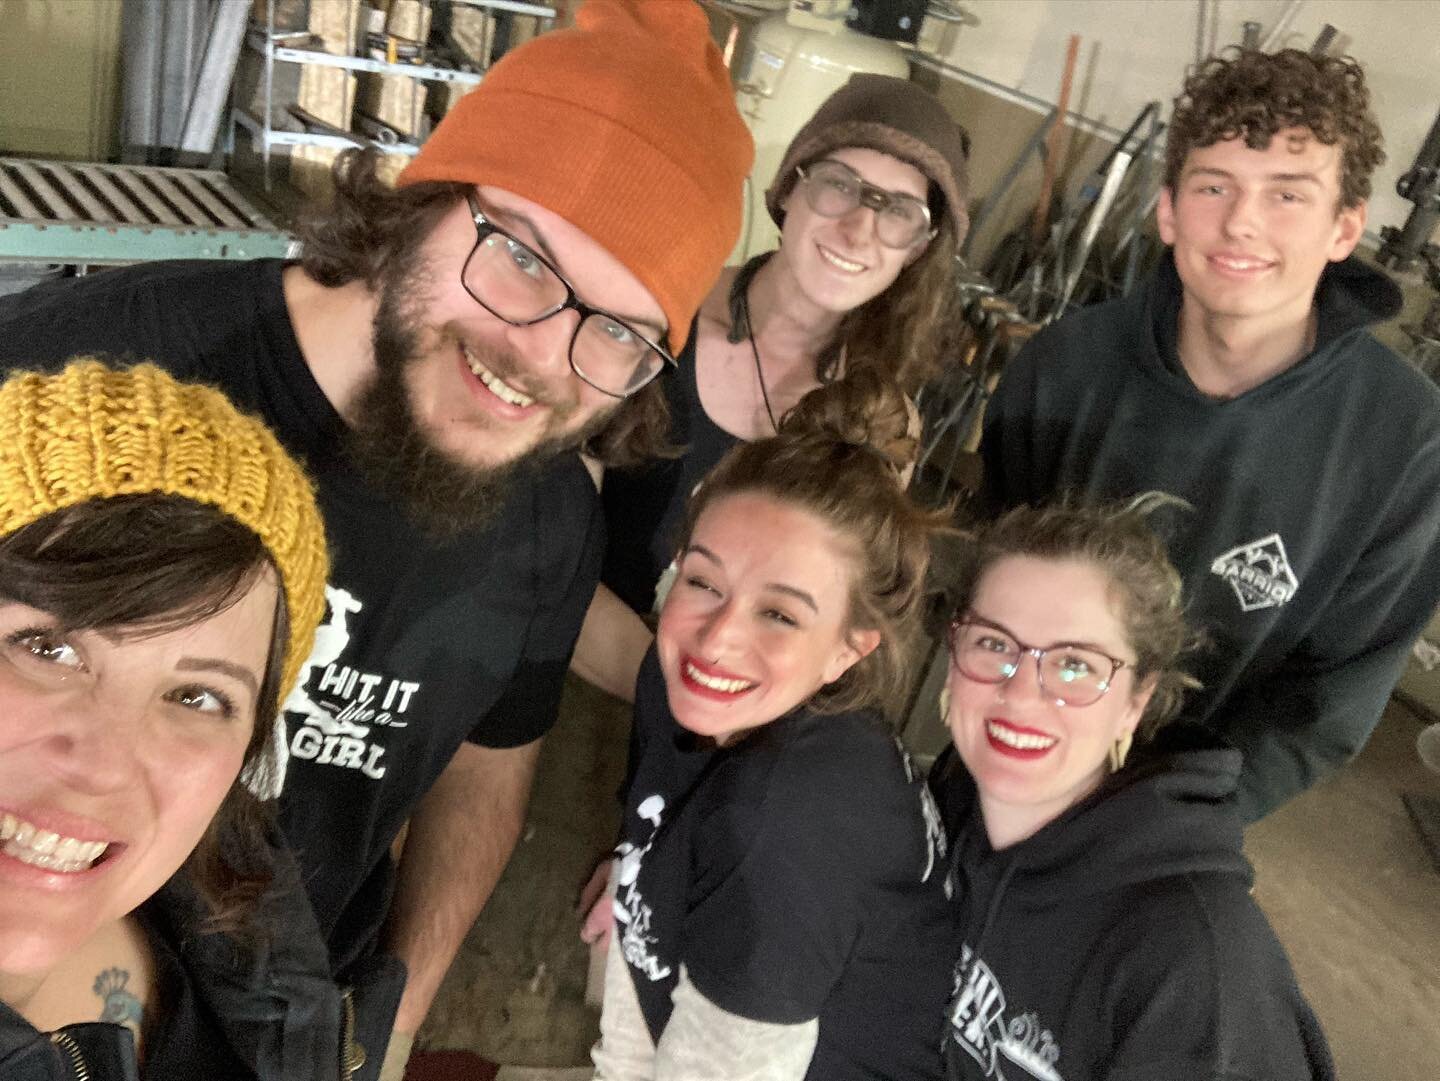 We had so much fun on our first day of filming with @theoysterfarm productions! We can&rsquo;t wait to share our story with the world. #ironmountainforge #madeinRI #likeagirl #blacksmith